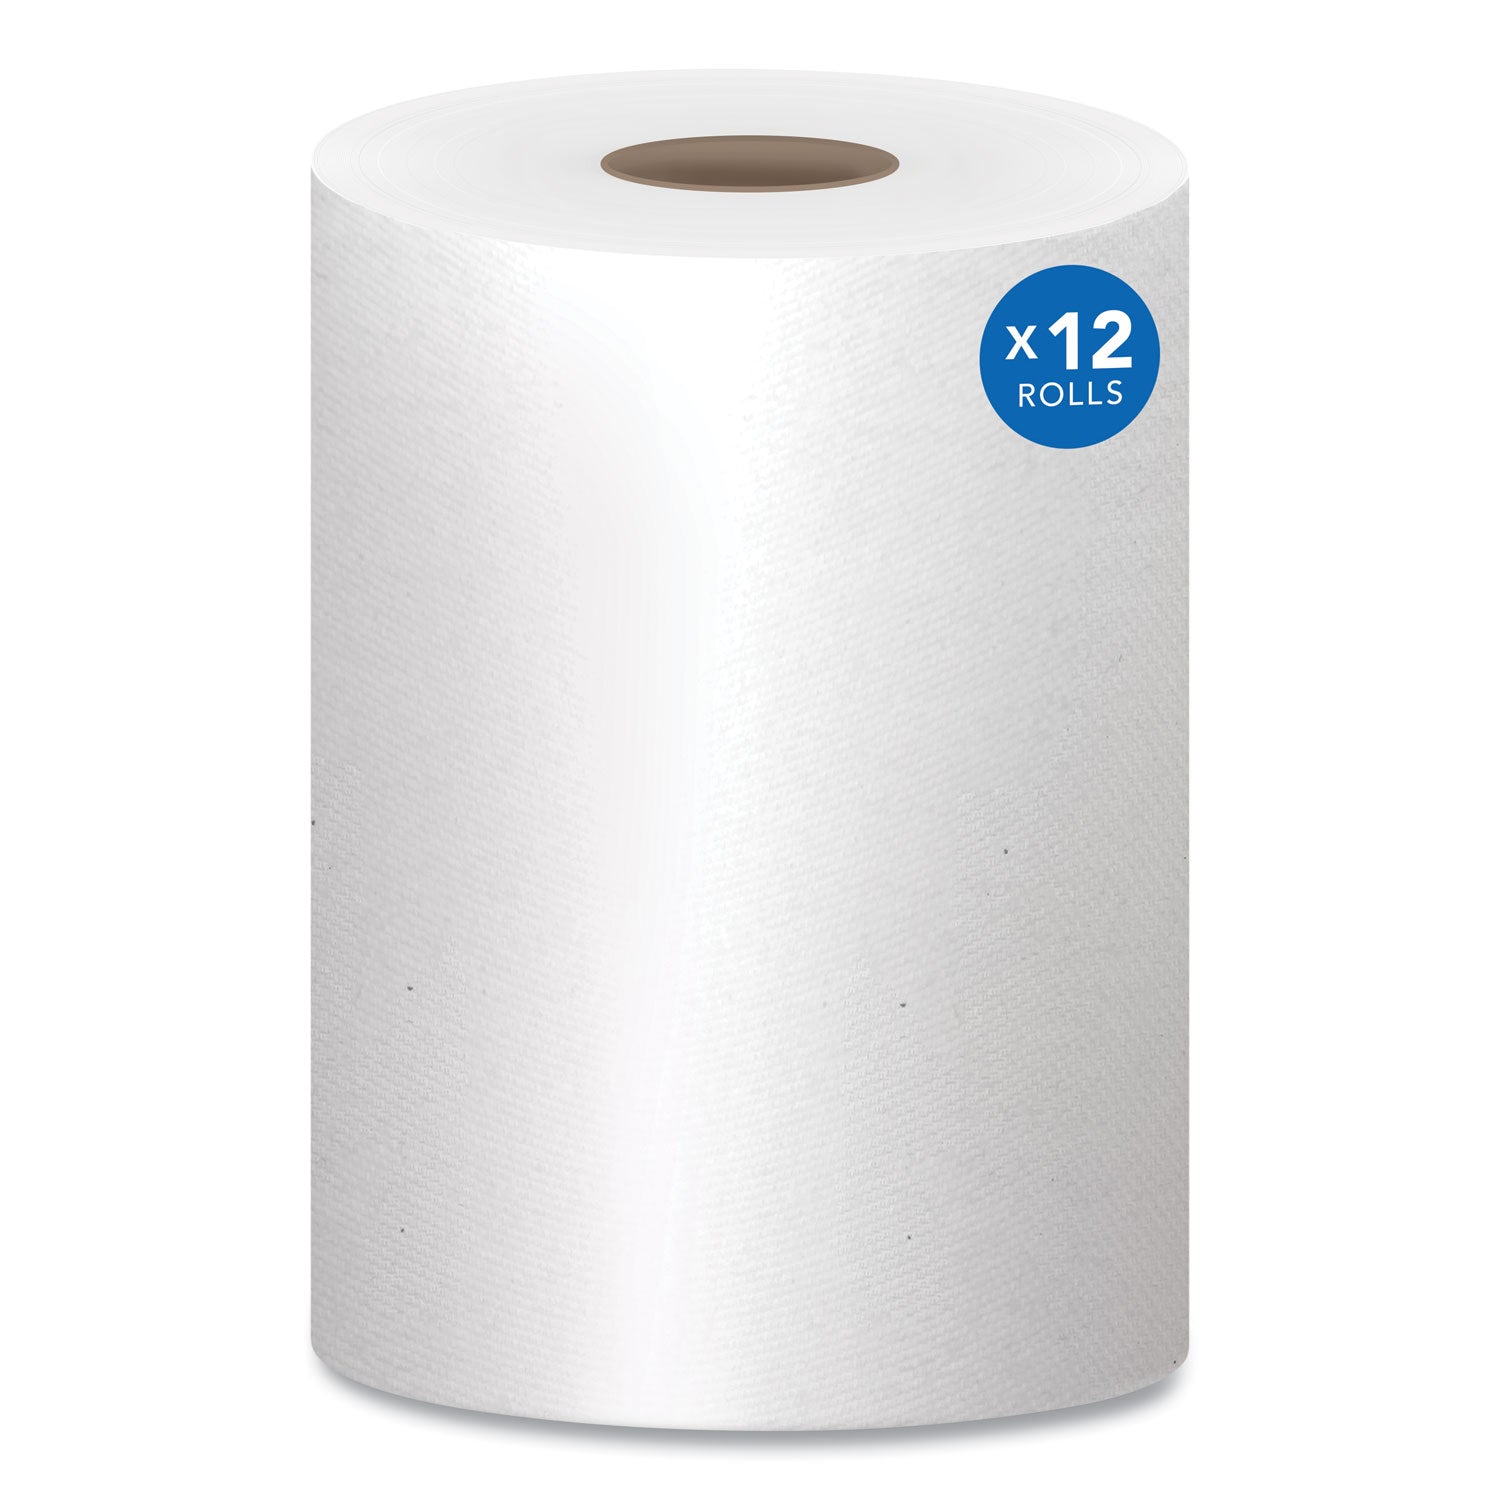 Essential Hard Roll Towels for Business, Absorbency Pockets, 1-Ply, 8" x 400 ft, 1.5" Core, White, 12 Rolls/Carton - 